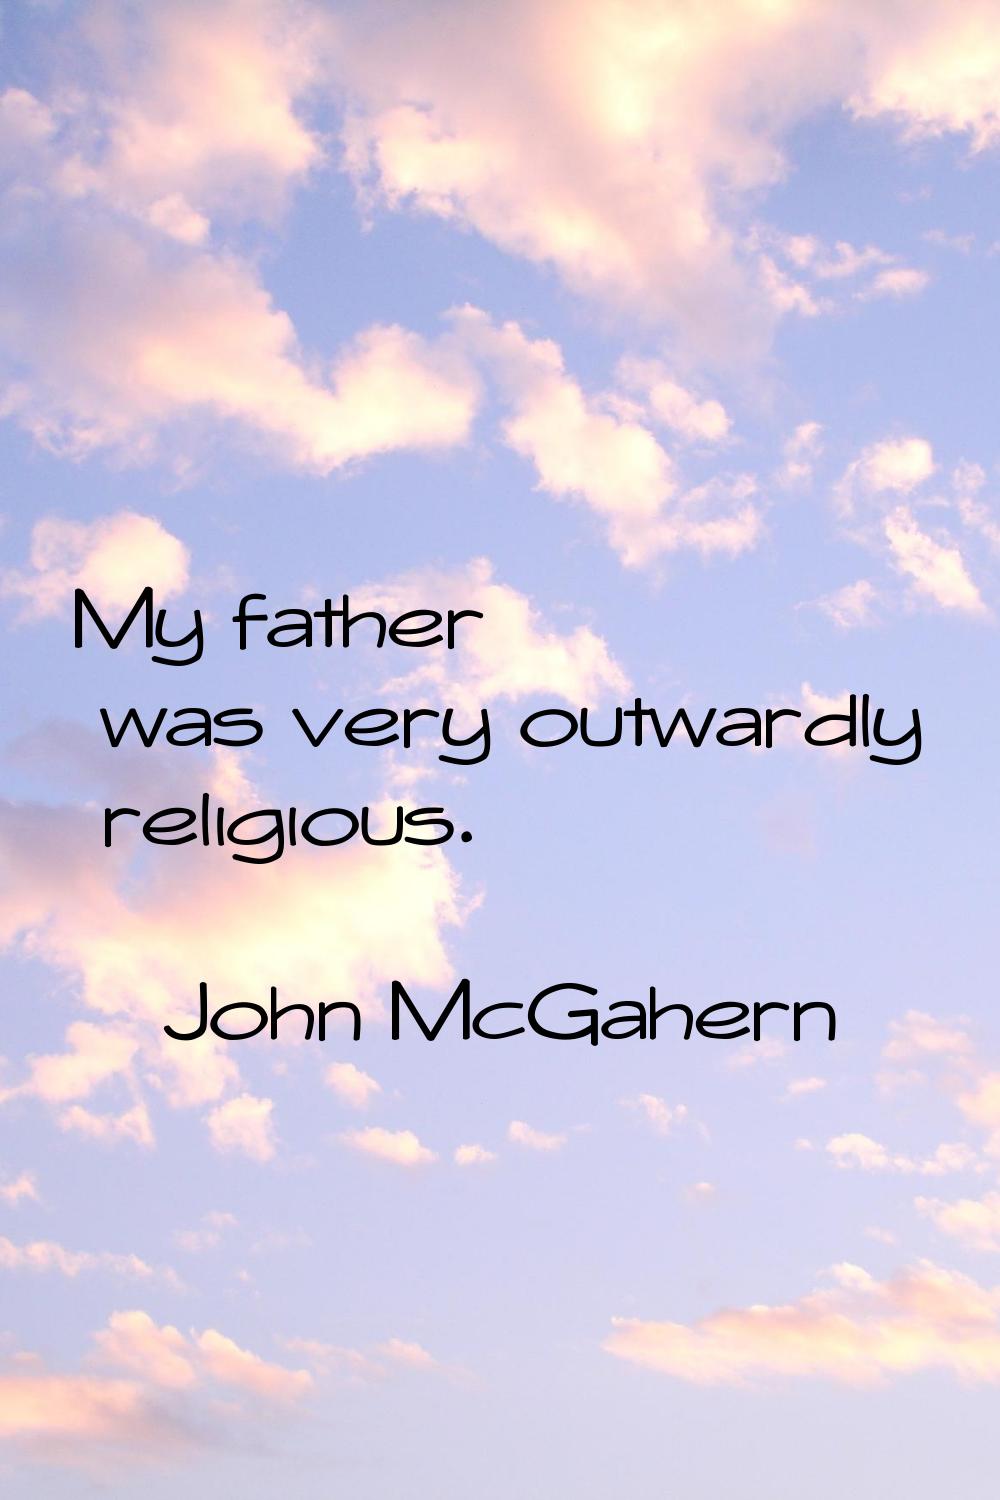 My father was very outwardly religious.